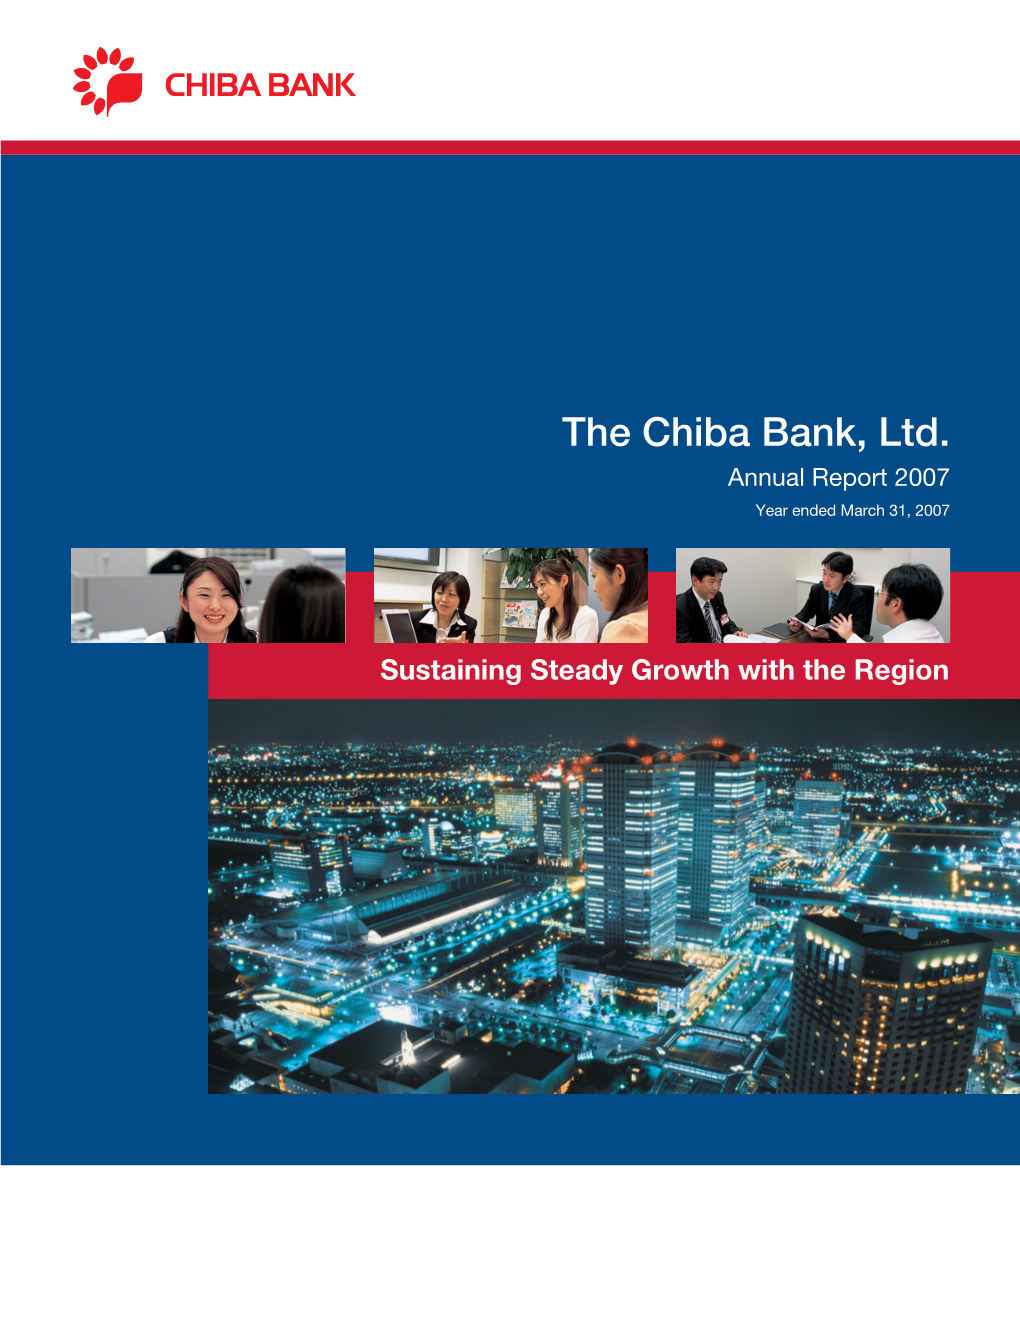 The Chiba Bank, Ltd. Annual Report 2007 Year Ended March 31, 2007